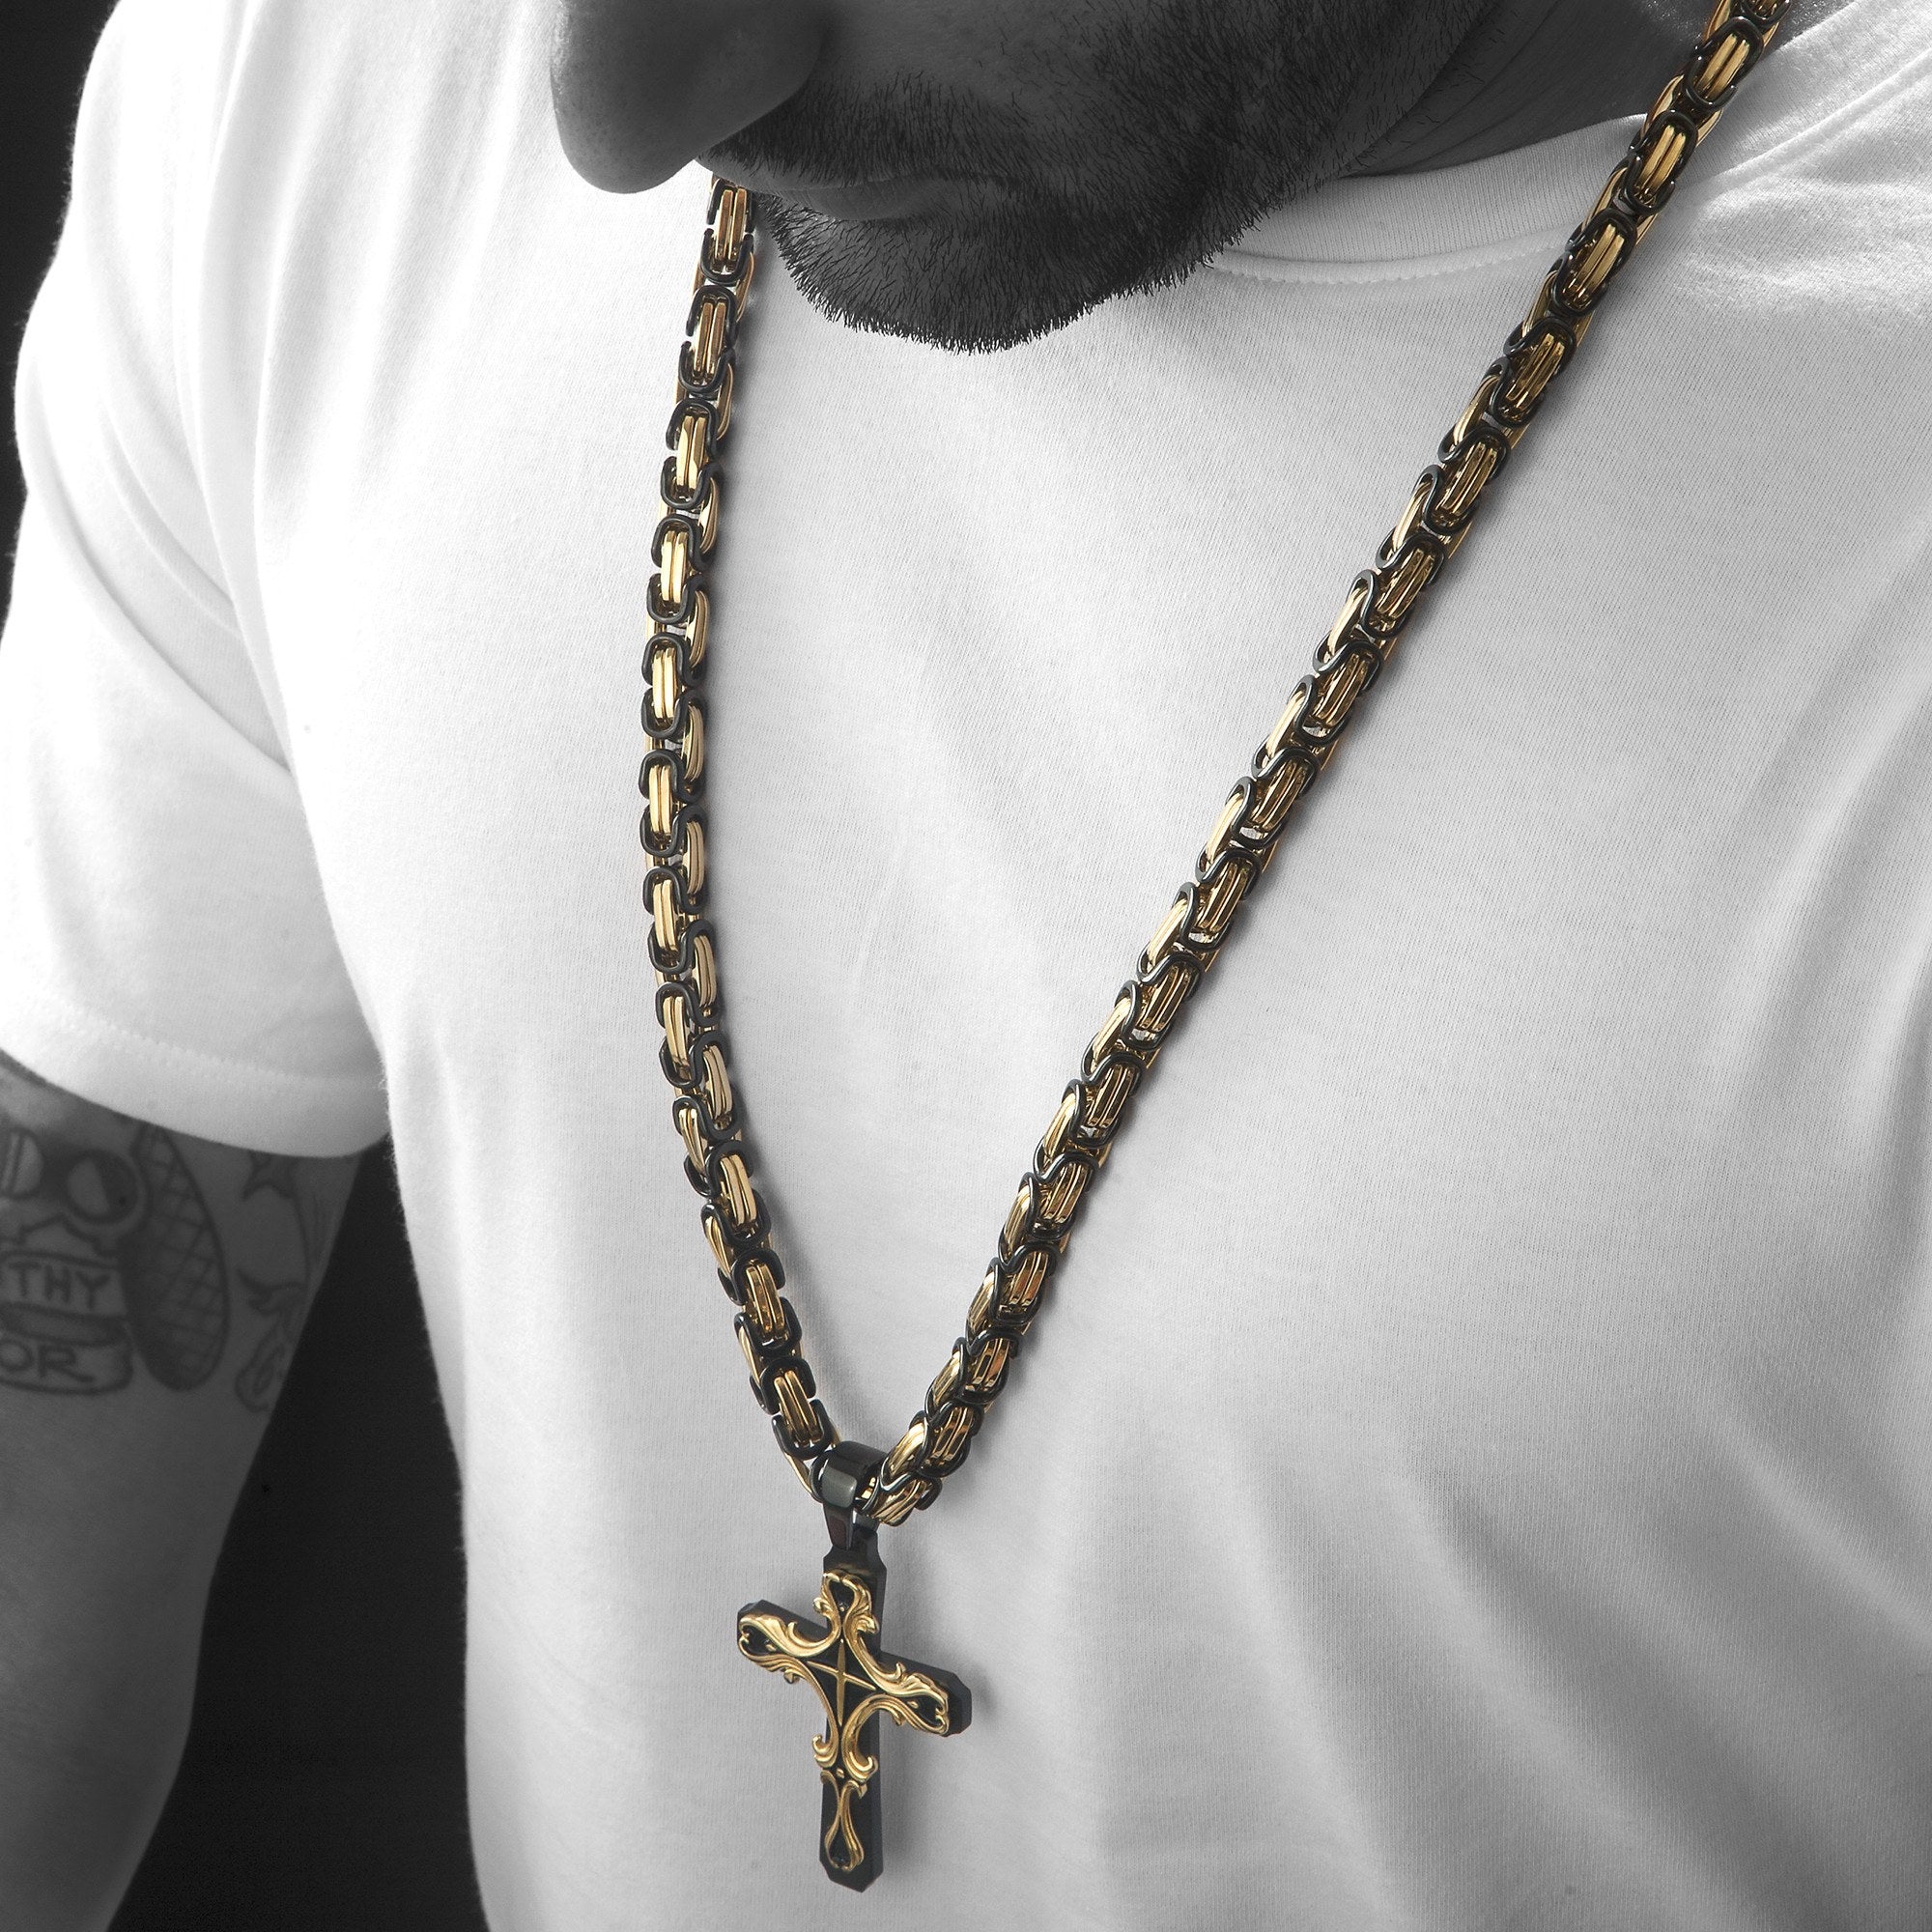 MADURIAO Mens Cross pendant sweater chain necklace for men India | Ubuy